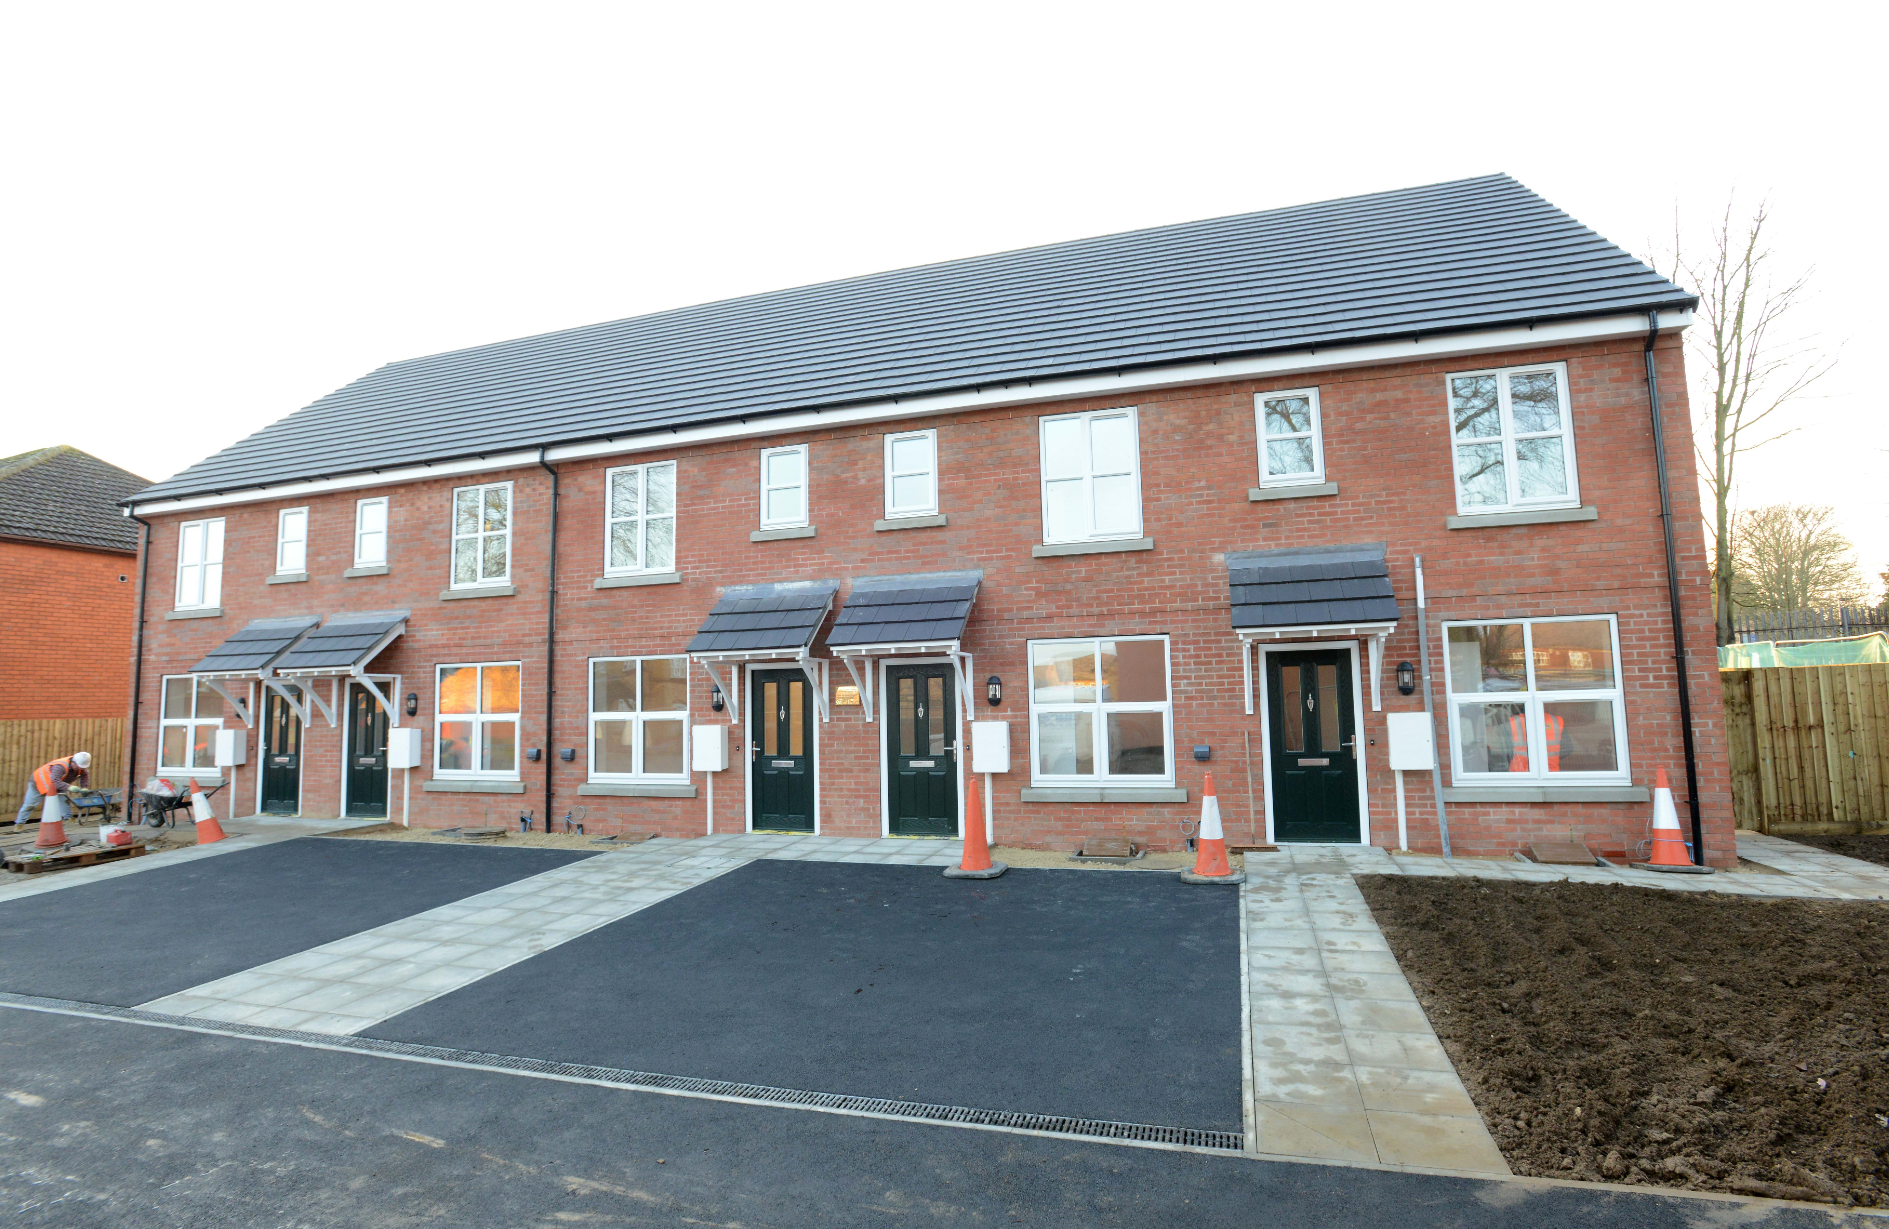 An example of new council housing in Lincoln.